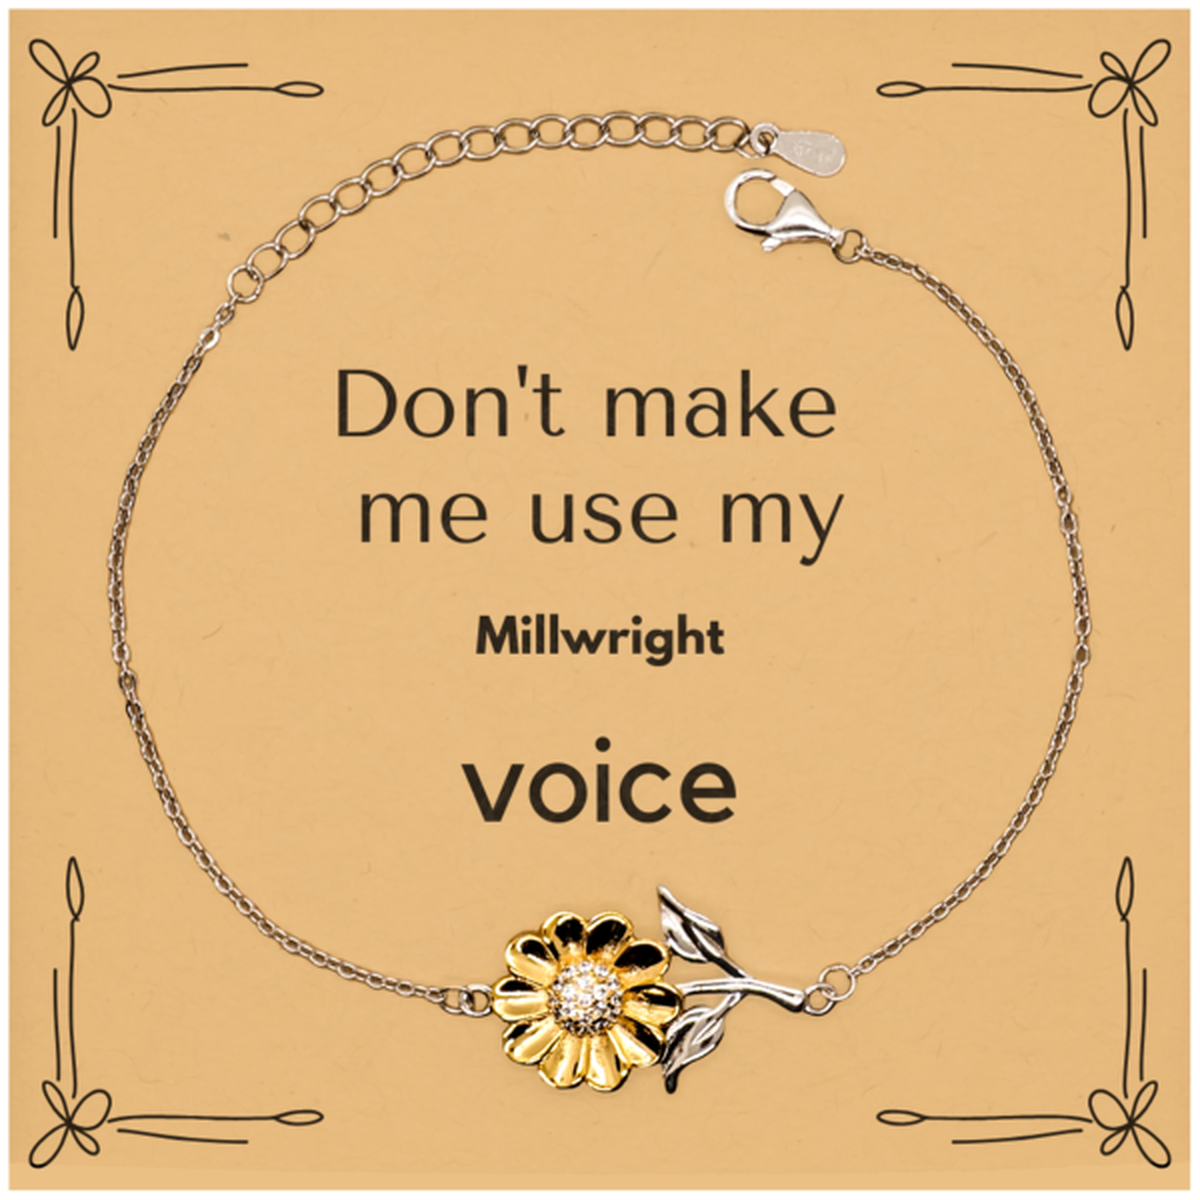 Don't make me use my Millwright voice, Sarcasm Millwright Card Gifts, Christmas Millwright Sunflower Bracelet Birthday Unique Gifts For Millwright Coworkers, Men, Women, Colleague, Friends